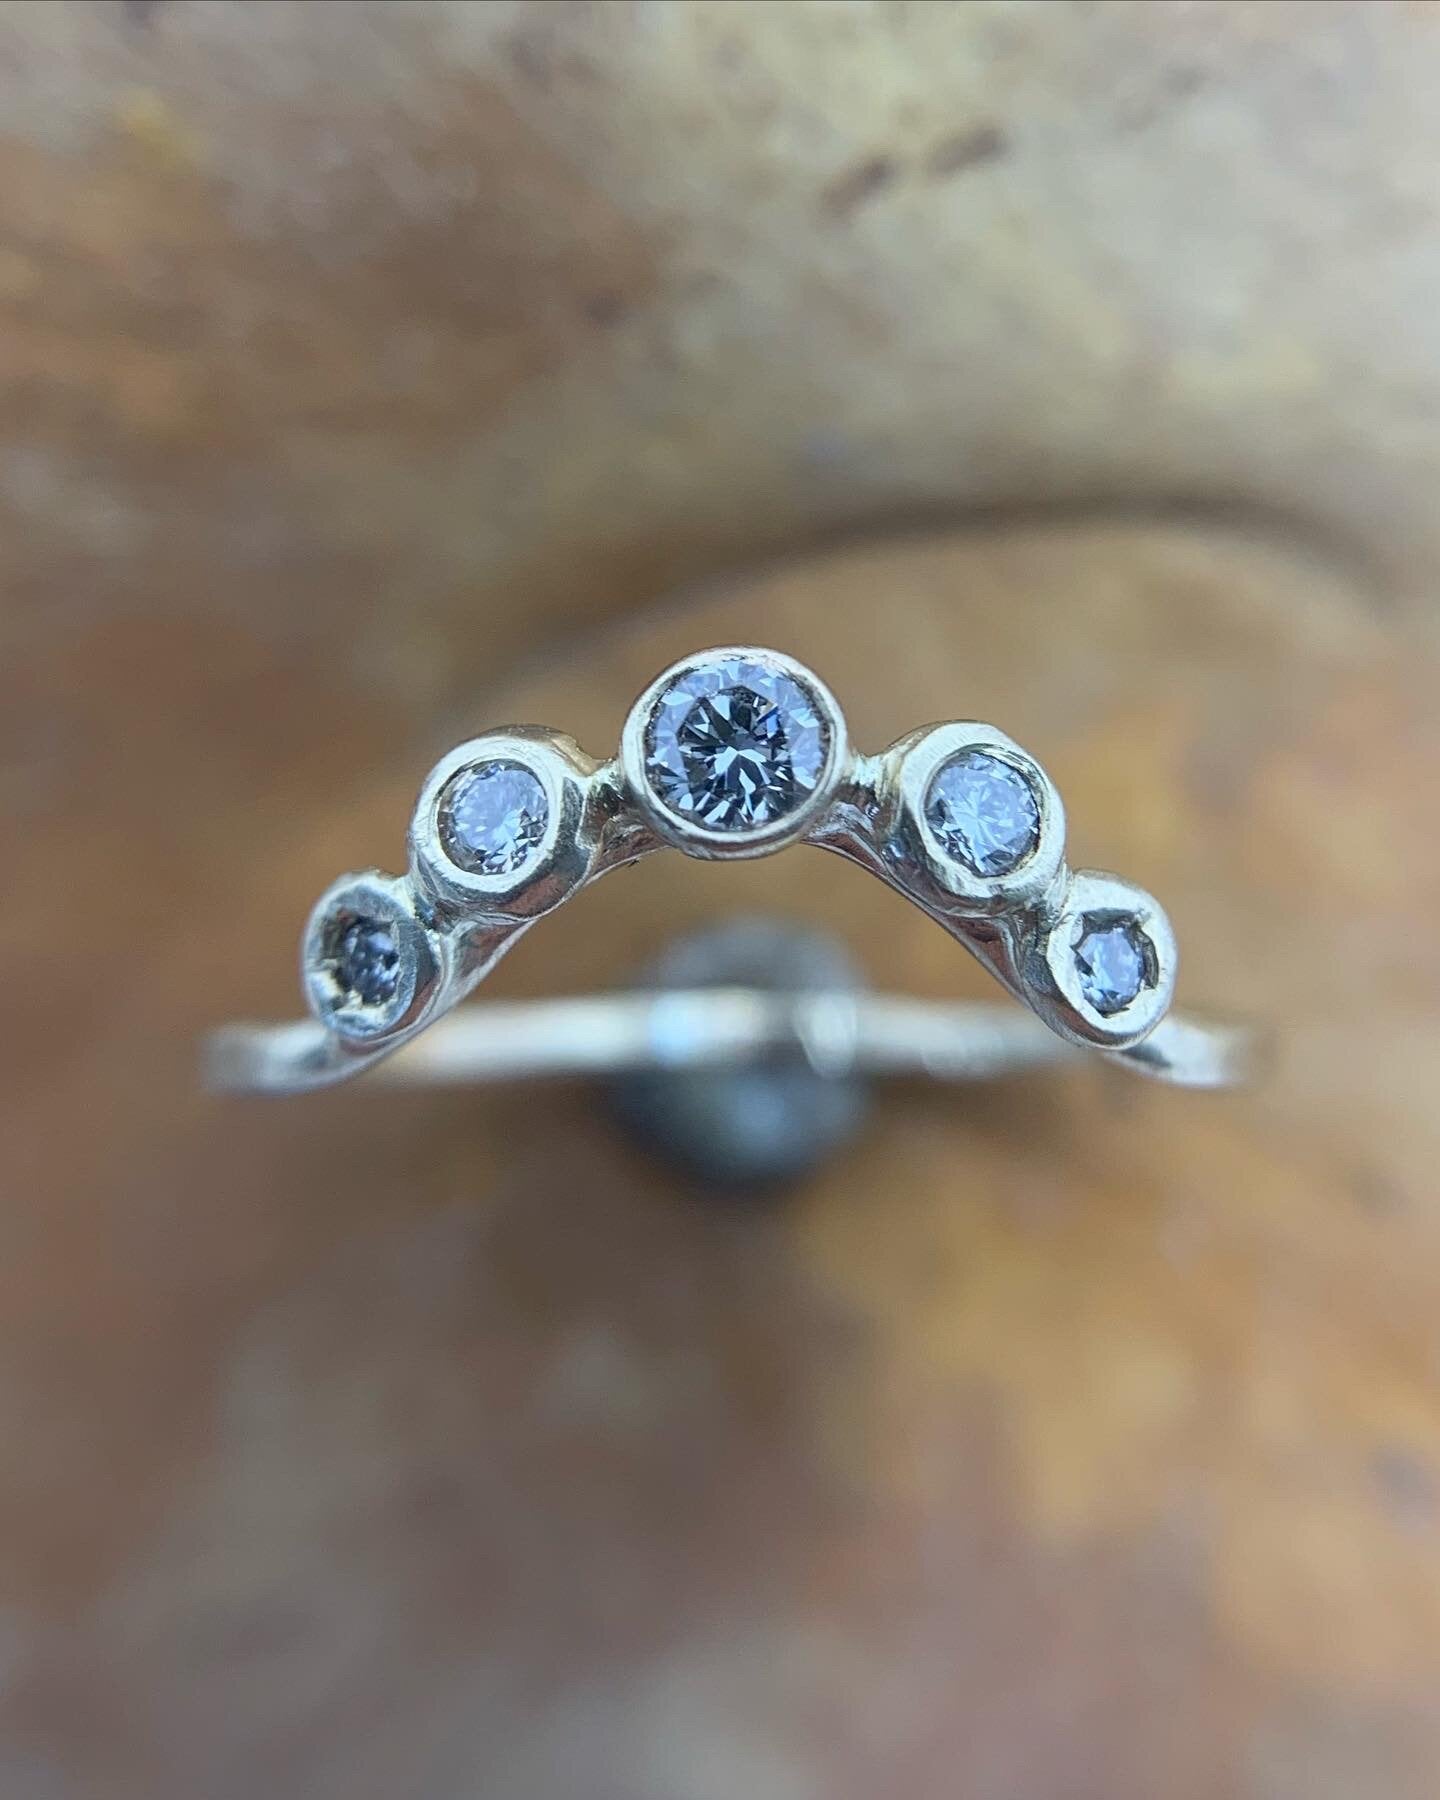 Arched diamond band